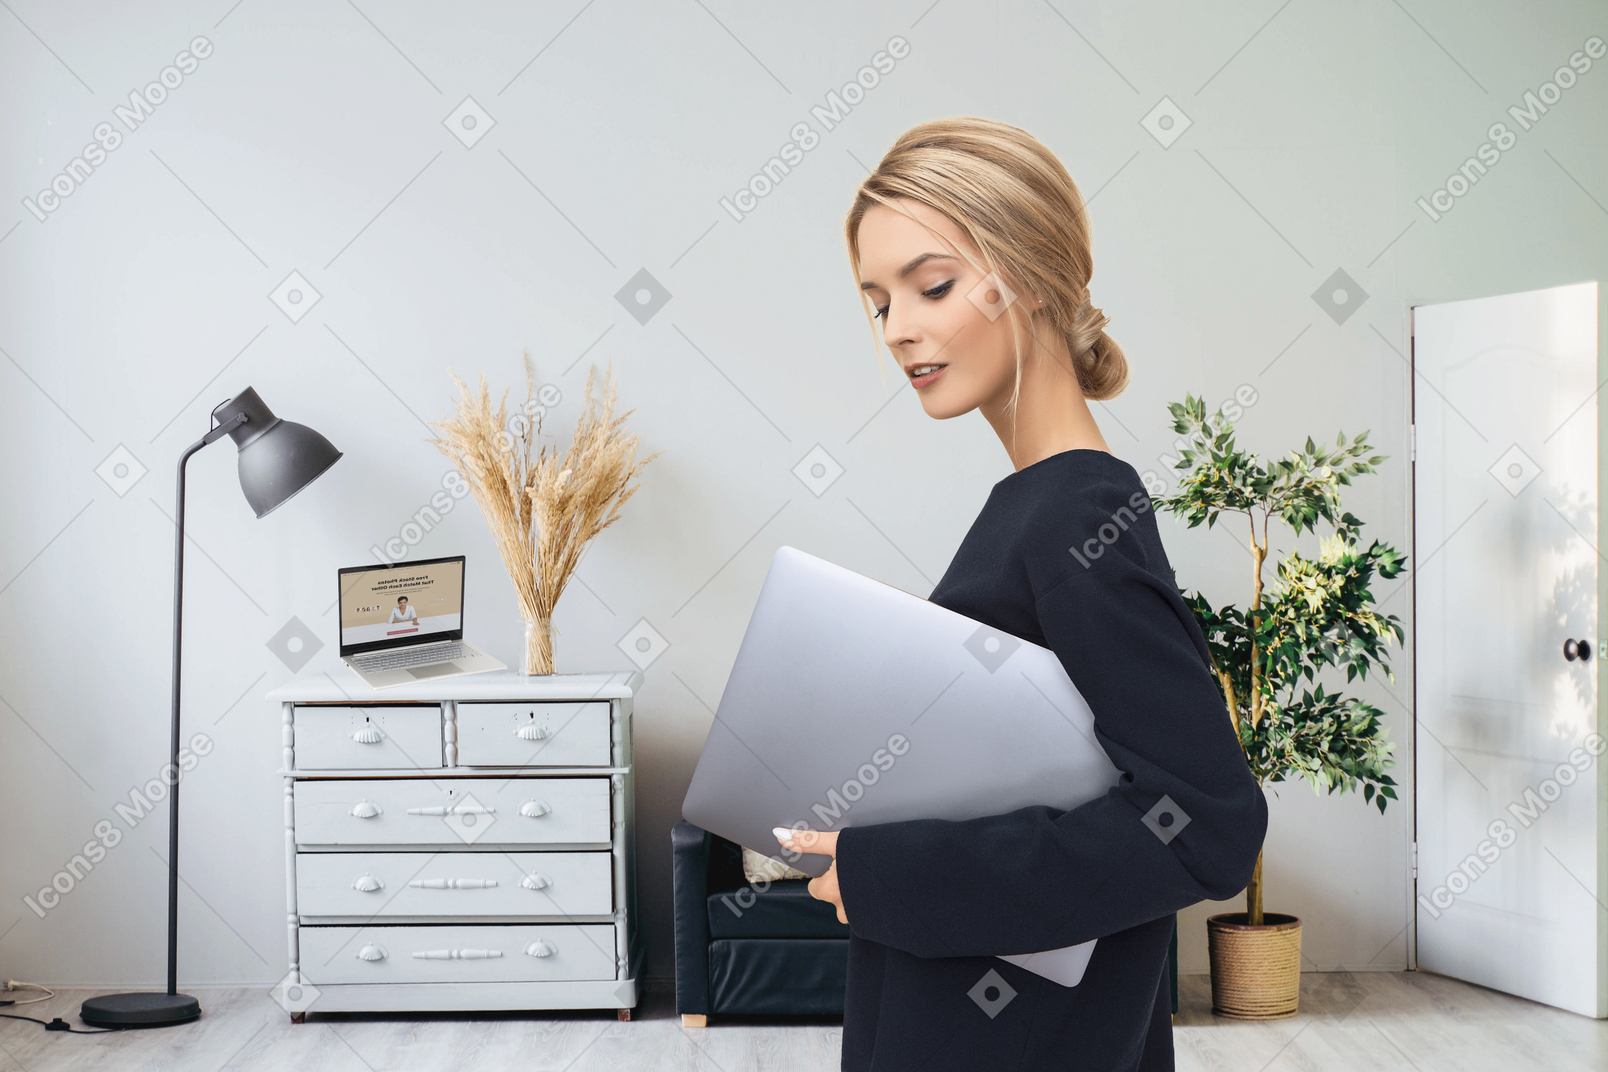 Woman standing with laptop in a room